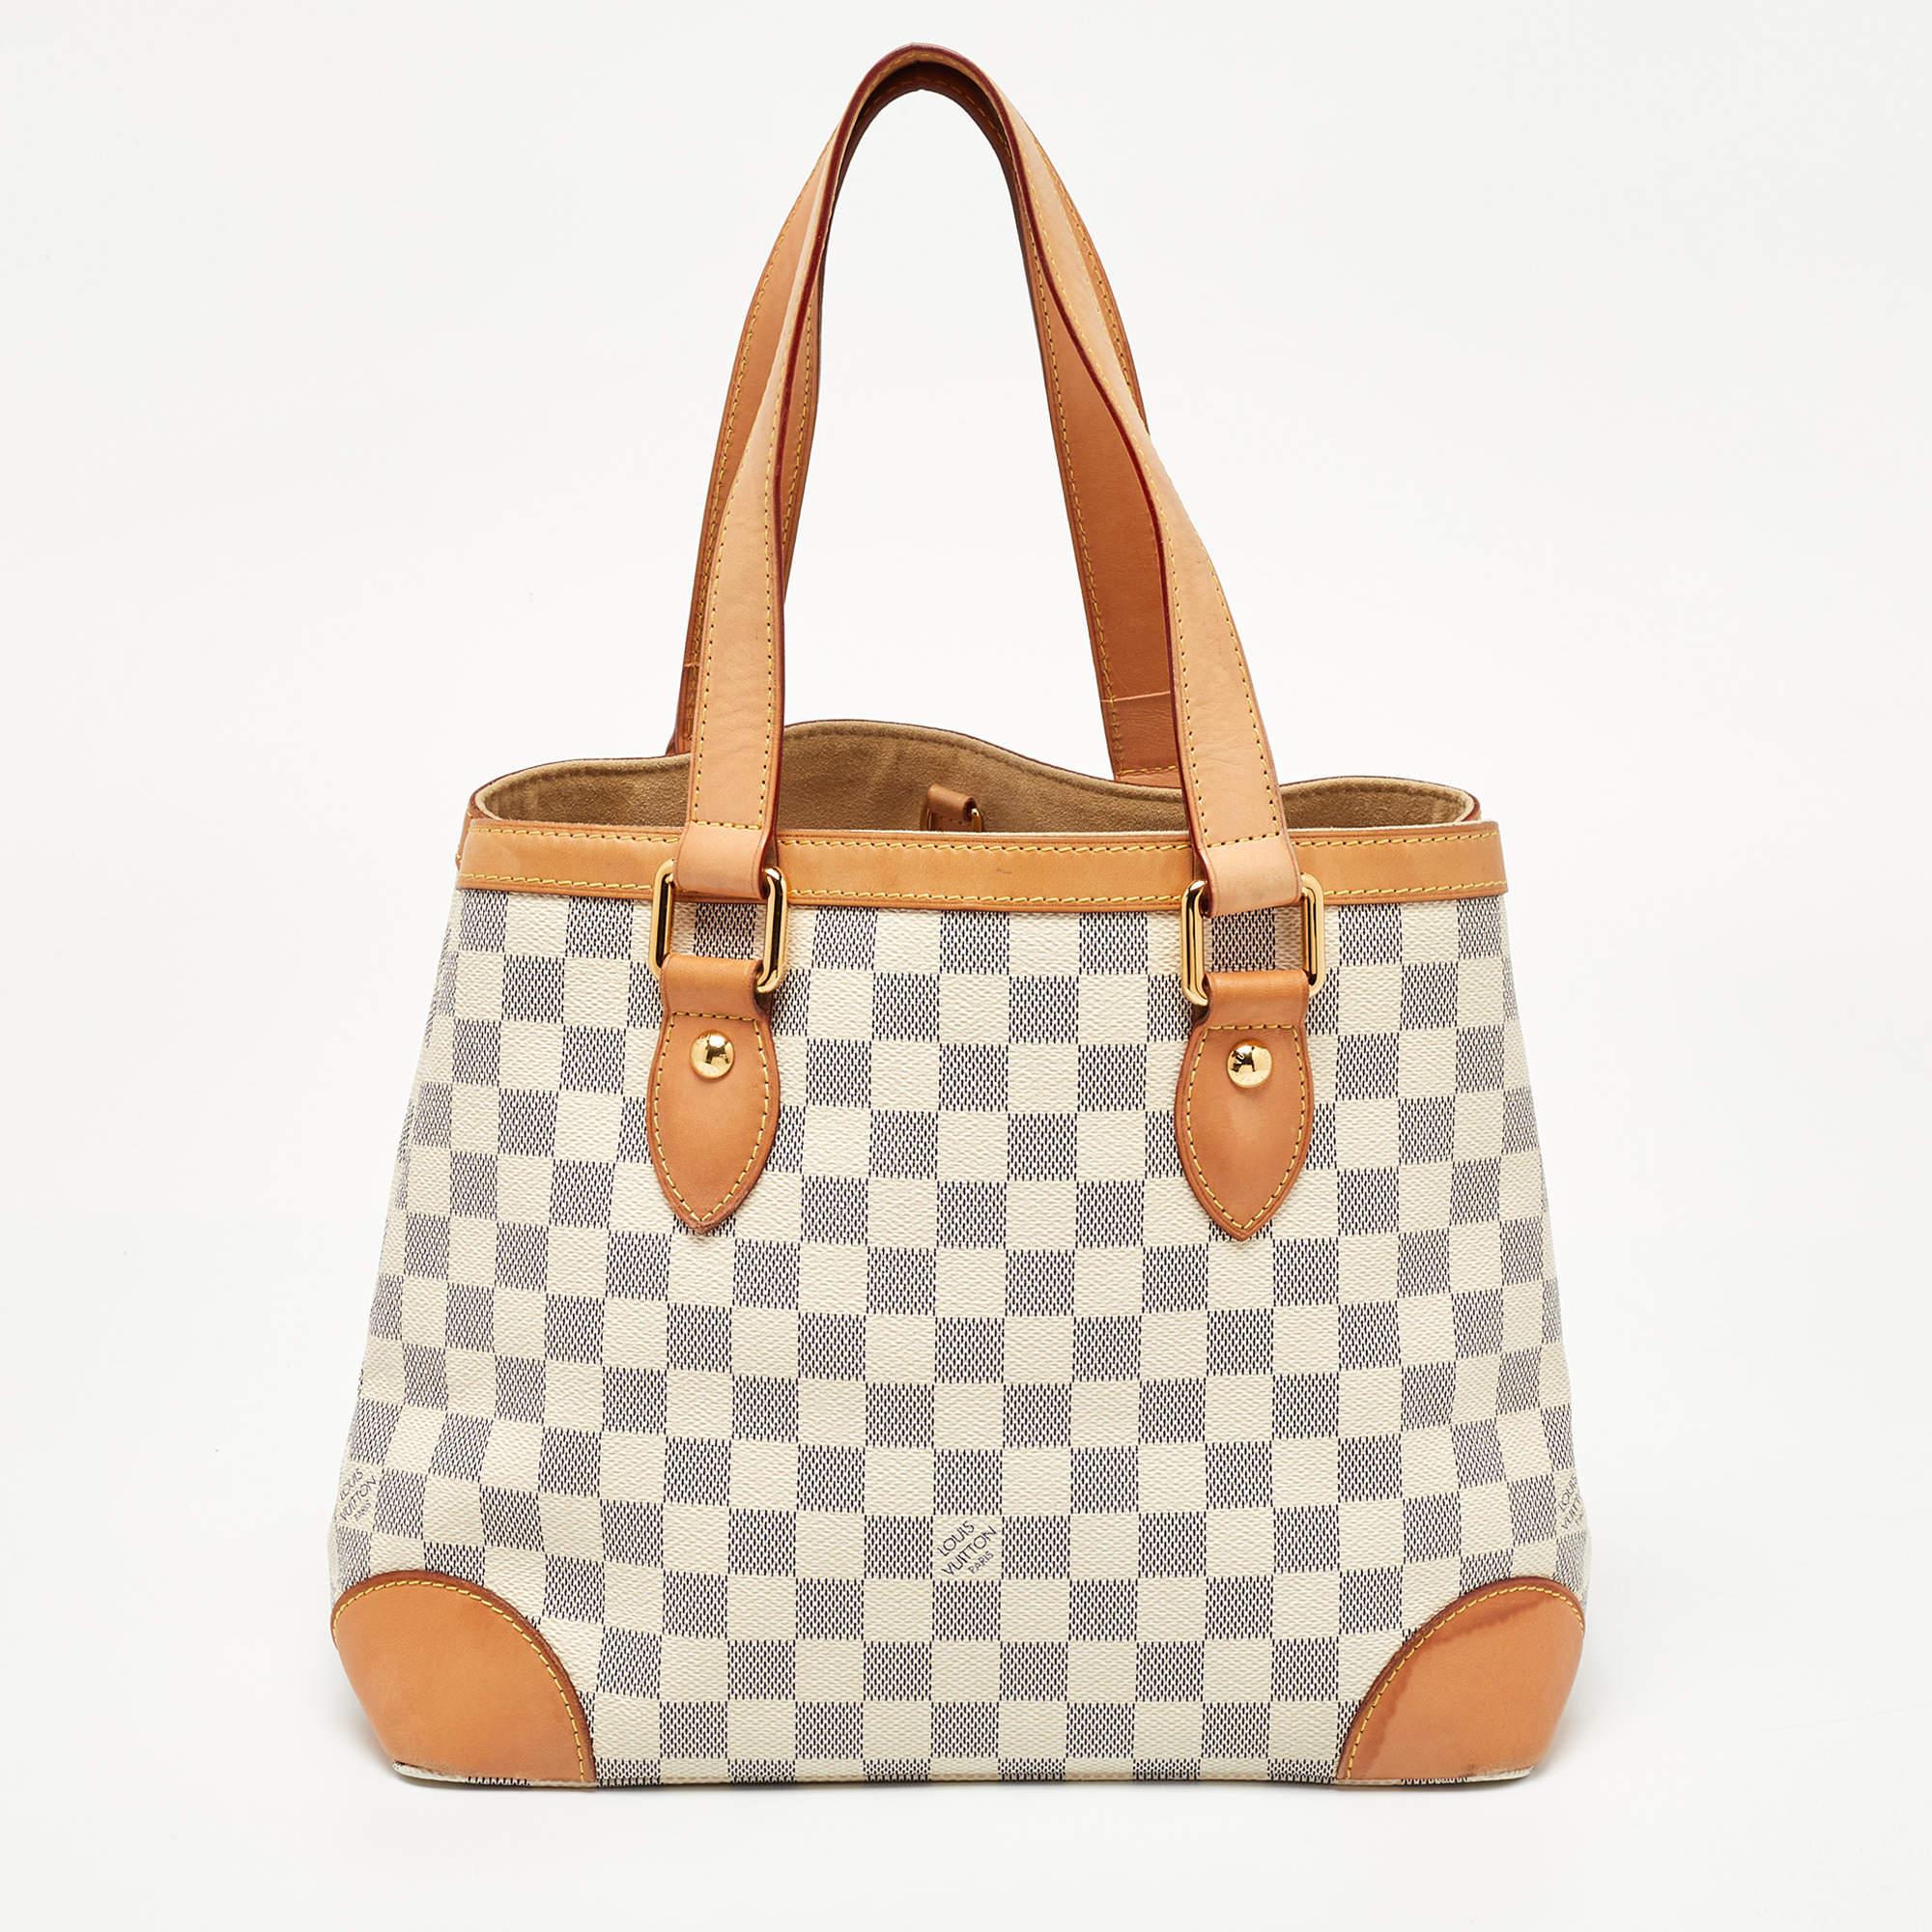 Handbags from Louis Vuitton enjoy widespread popularity owing to their high style and functionality. This Hampstead bag is no exception. Crafted from their signature Damier Azur and leather, the bag comes with two flat top handles and a hook clasp